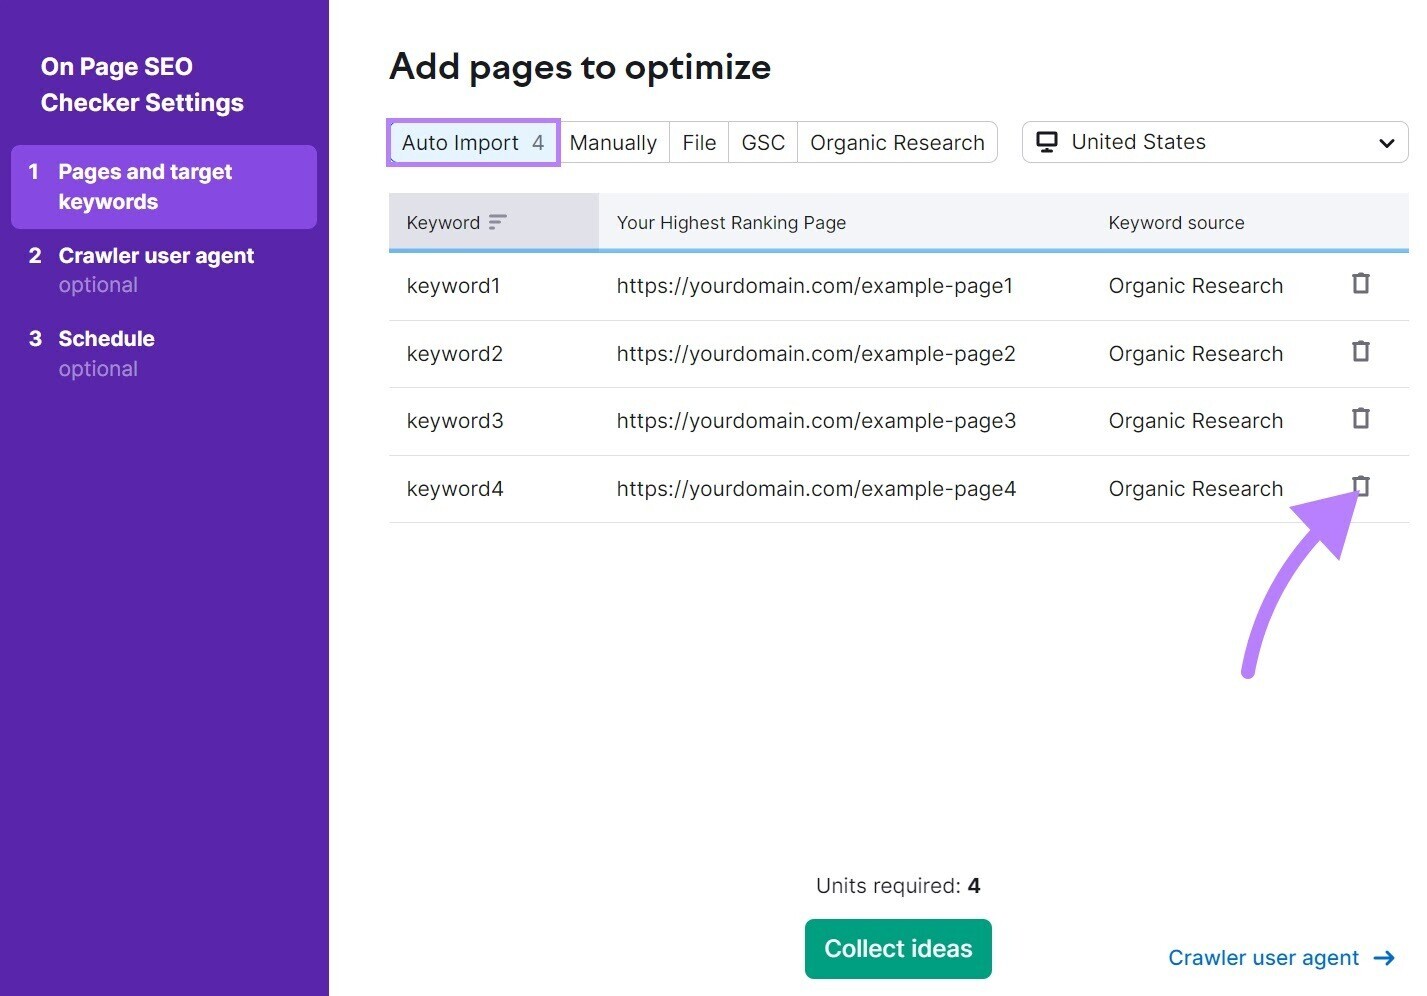 "Add pages to optimize - Auto import" window in On Page SEO Checker Settings